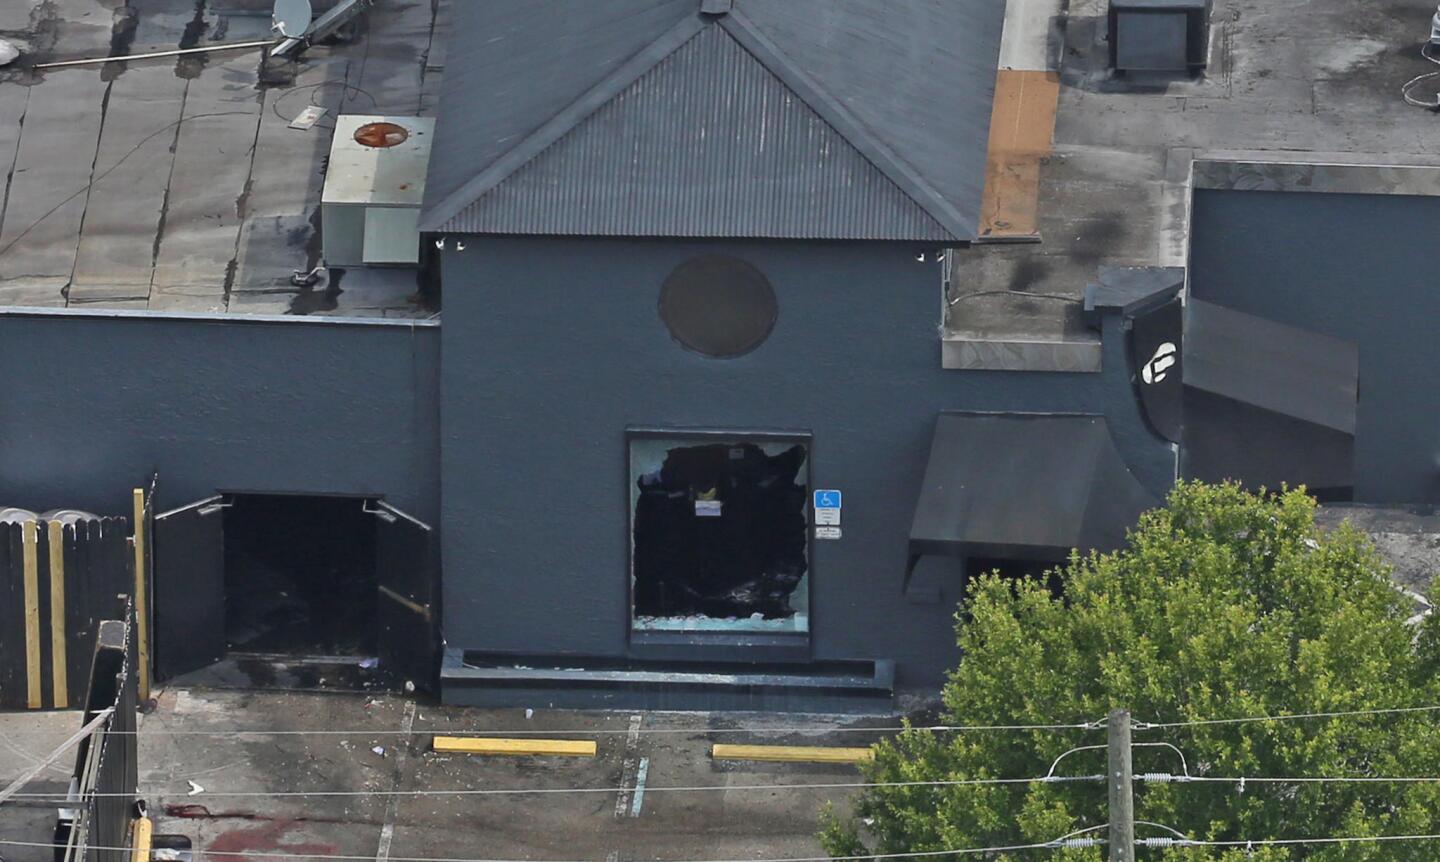 Aerial view of the shooting scene at Pulse nightclub in Orlando, Fla.